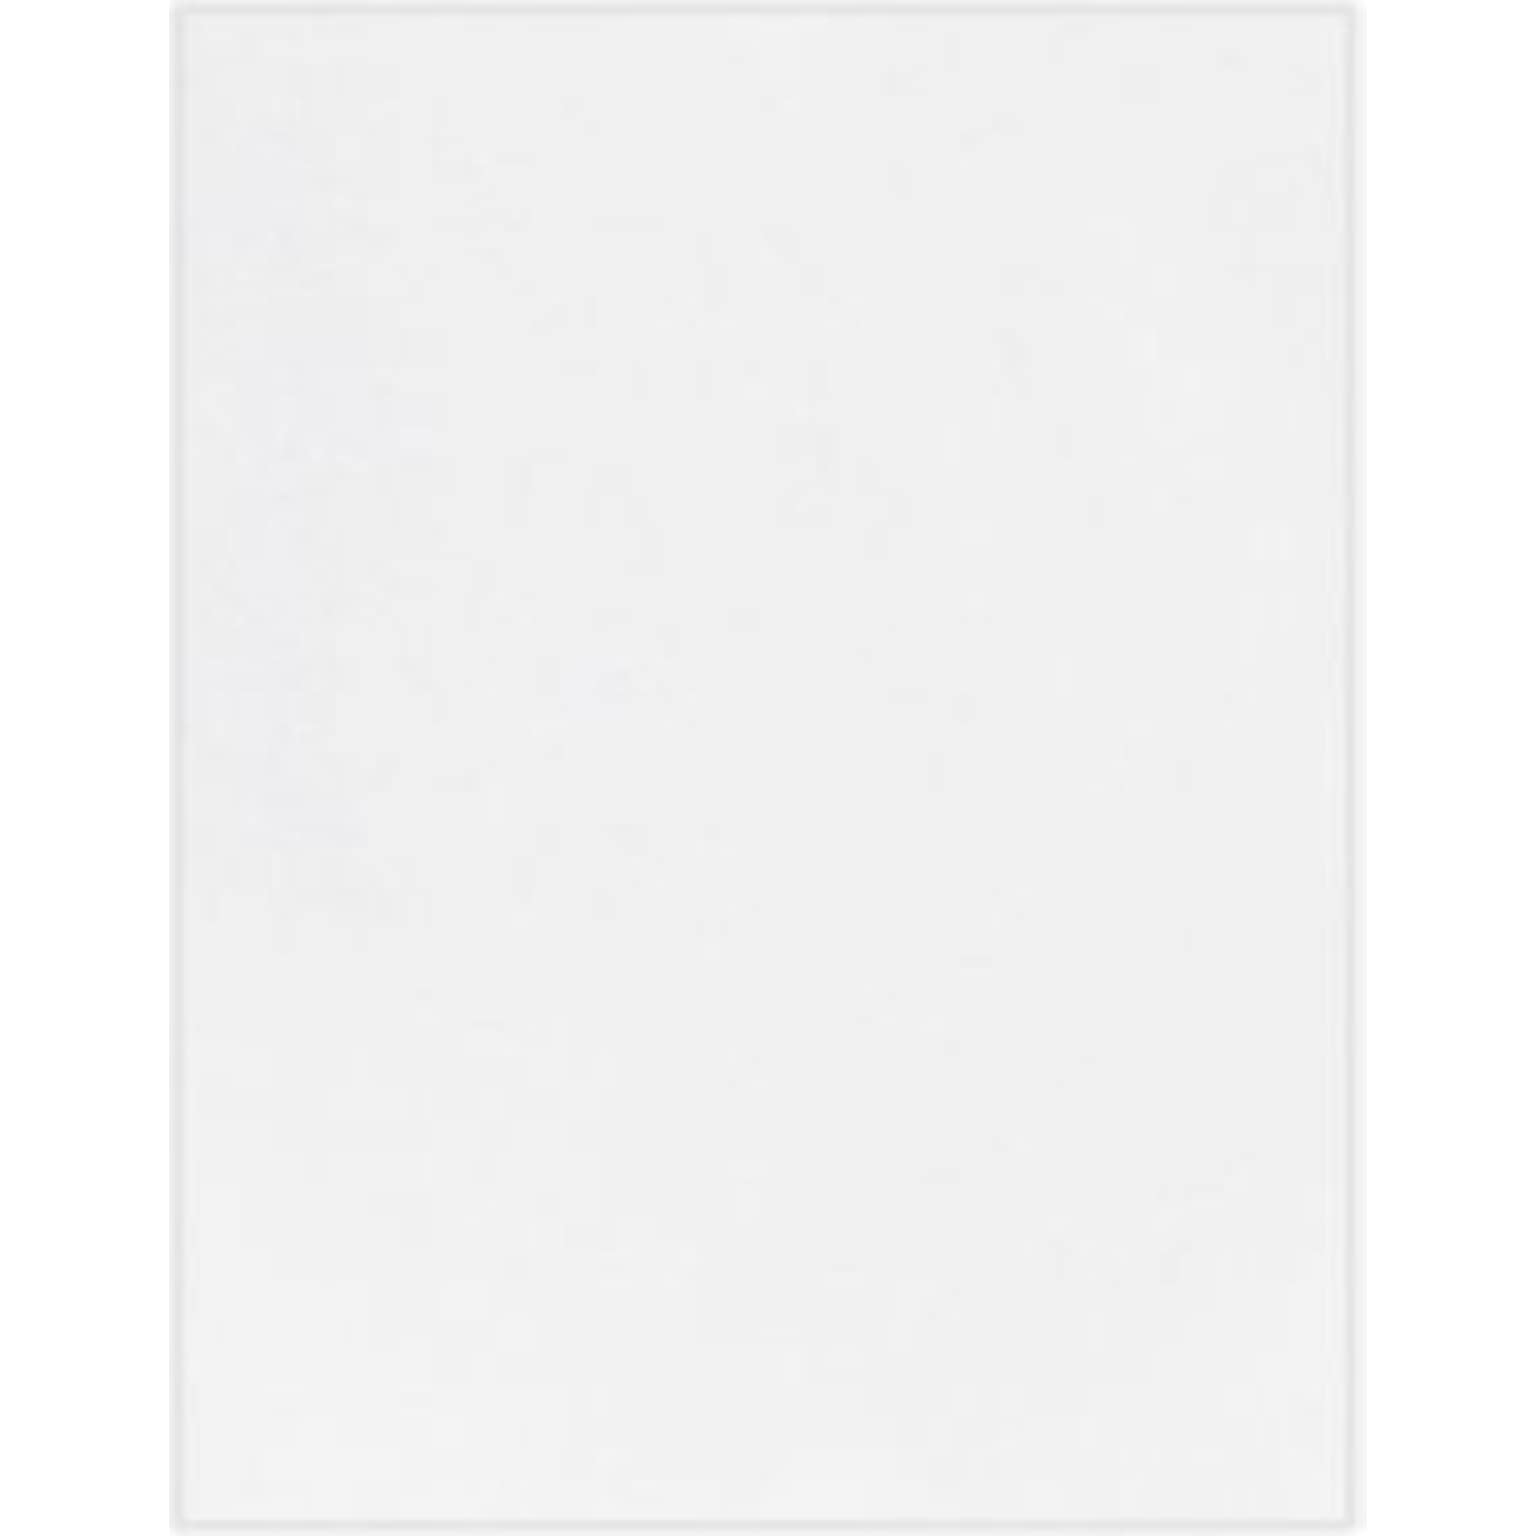 LUX 100 lb. Cardstock Paper, 11 x 17, White, 250 Sheets/Pack (1117-C-W-250)